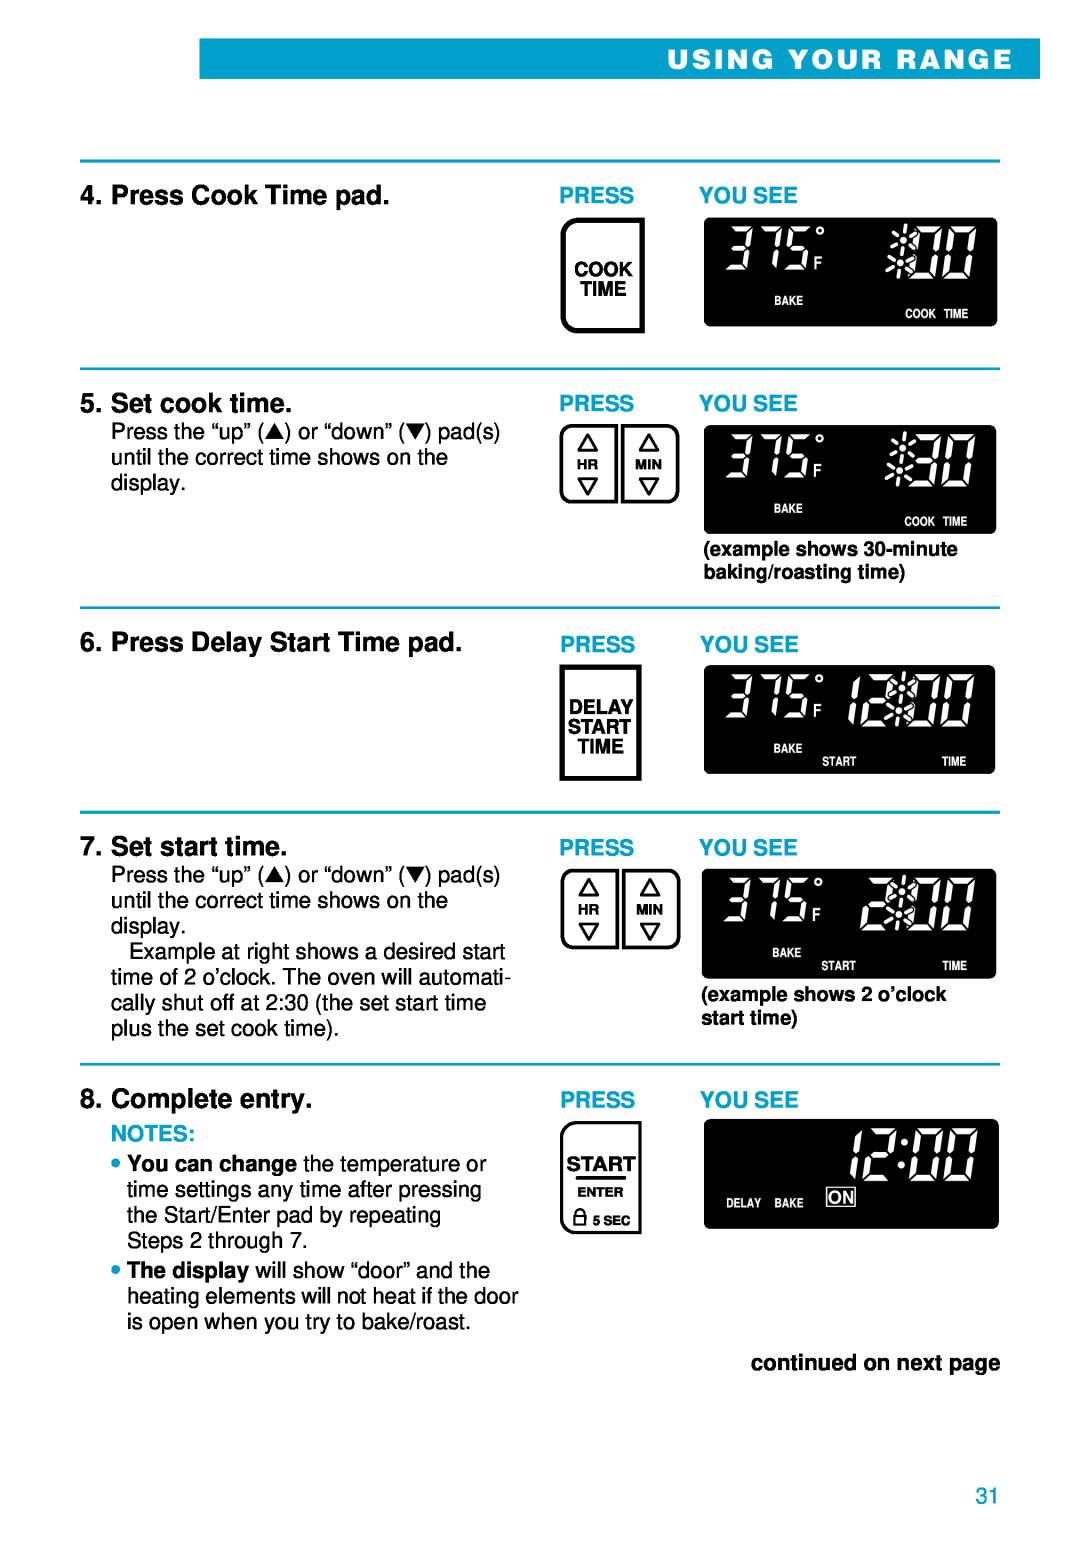 Whirlpool RS610PXE Press Delay Start Time pad, Set start time, Complete entry, Using Your Range, Press Cook Time pad 